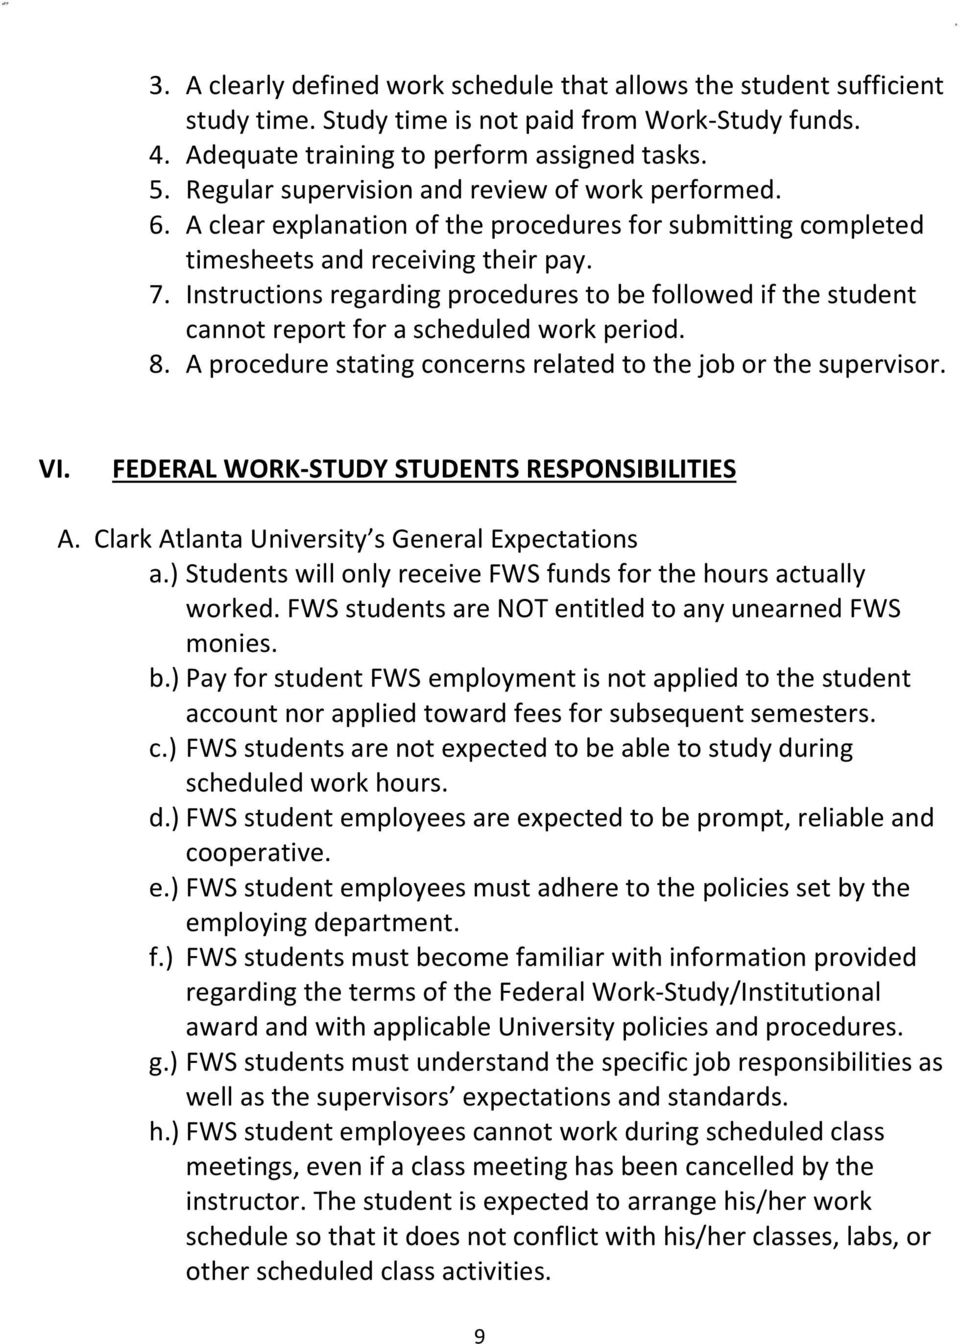 Instructions regrding procedures to be followed if the student cnnot report for scheduled work period. 8. A procedure stting concerns relted to the job or the supervisor. VI.